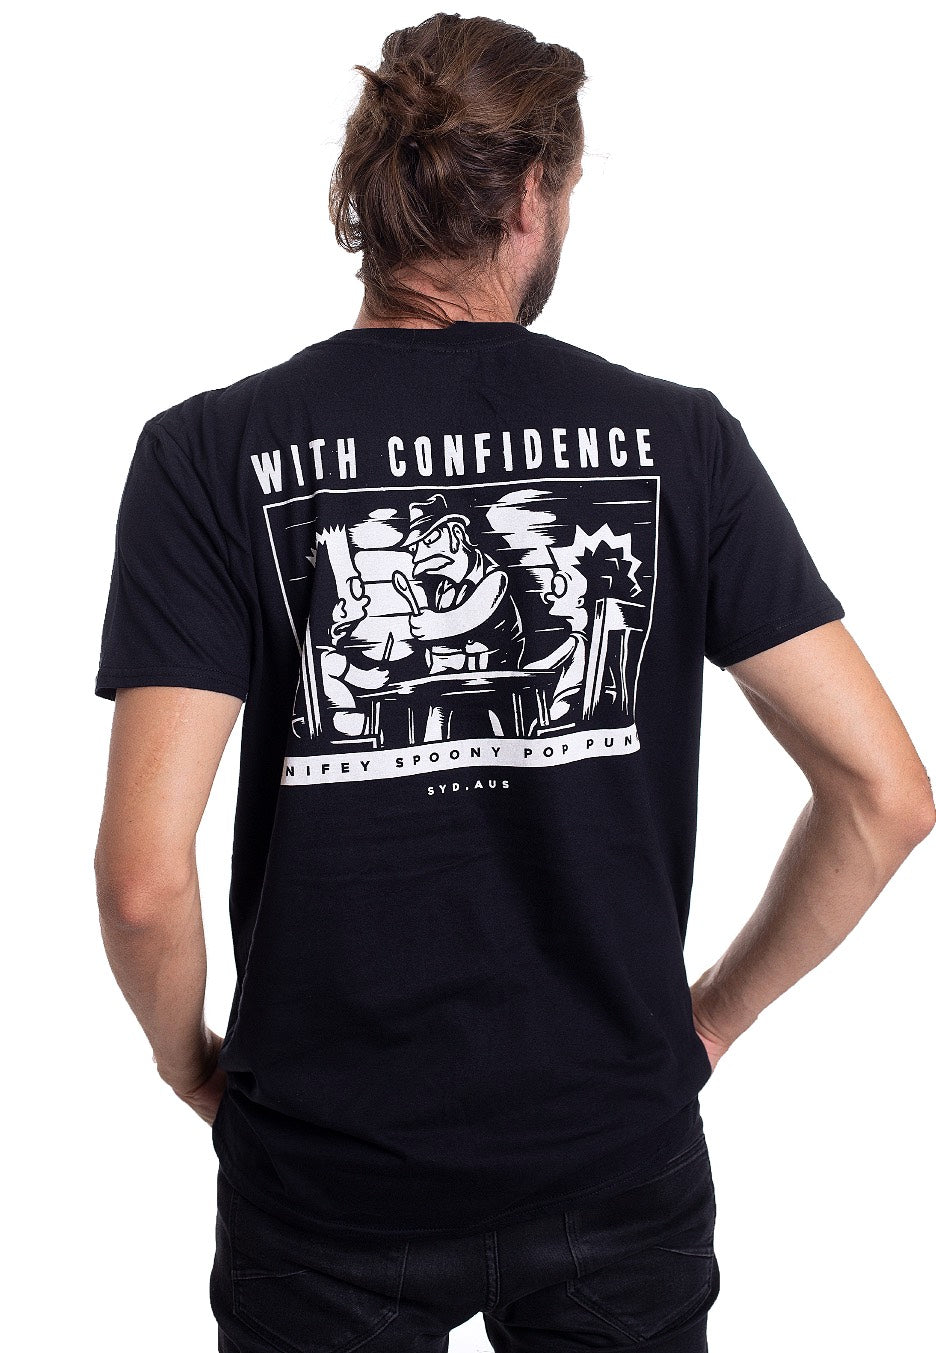 With Confidence - Knifey Spooney - T-Shirt